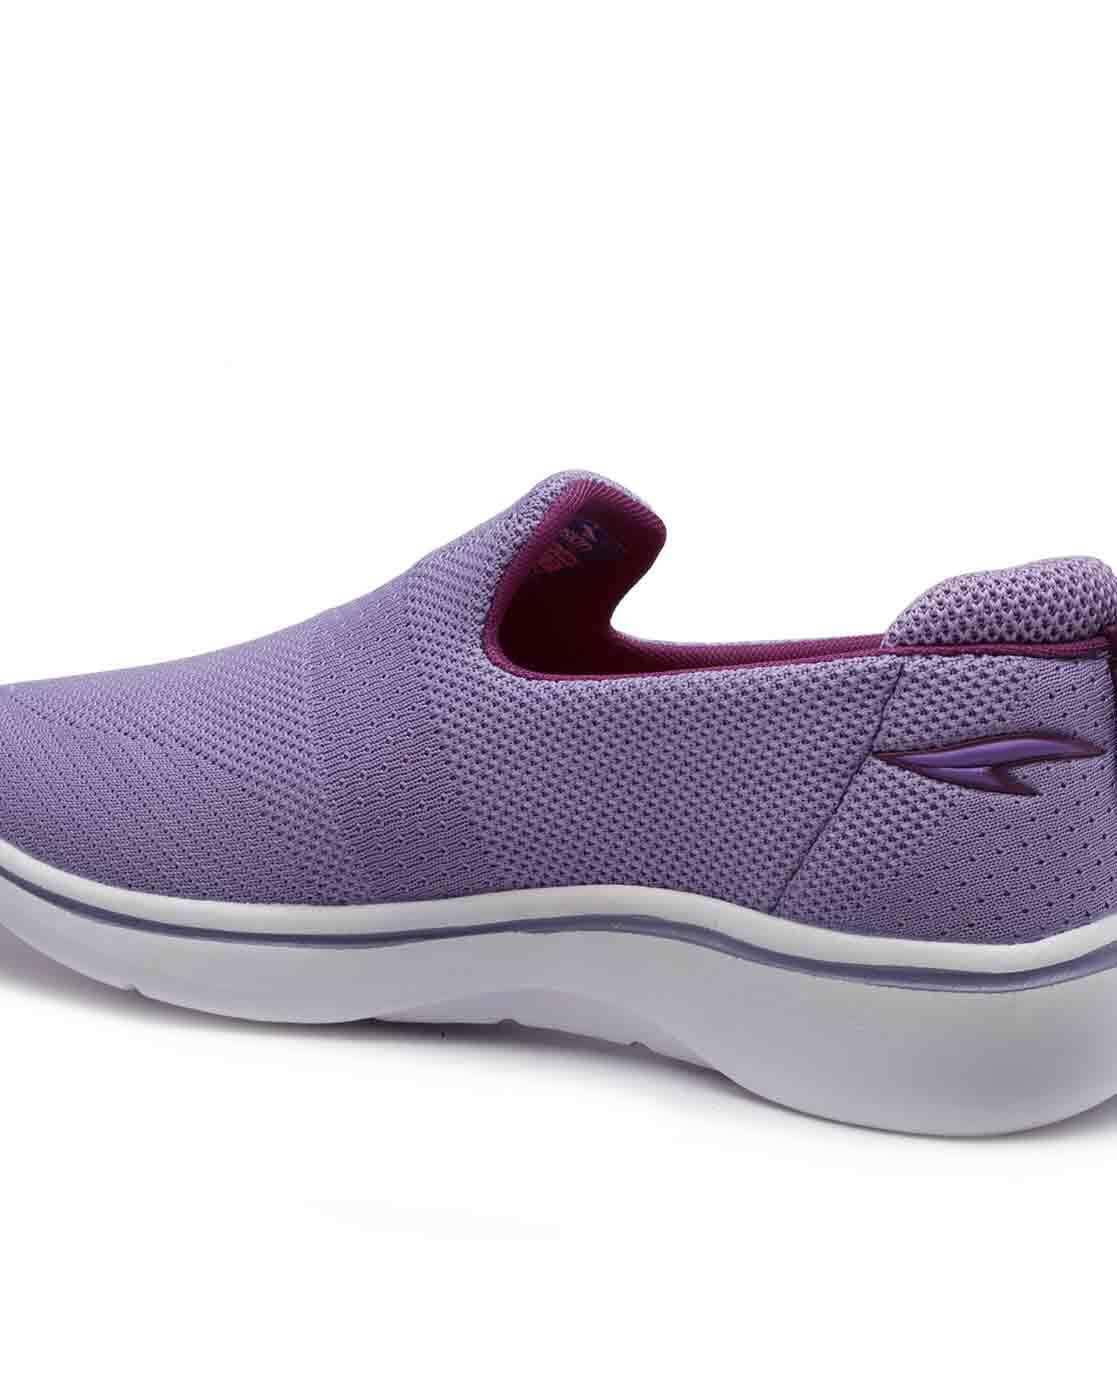 Skechers XL Size Purple Tops in Kannur - Dealers, Manufacturers & Suppliers  - Justdial